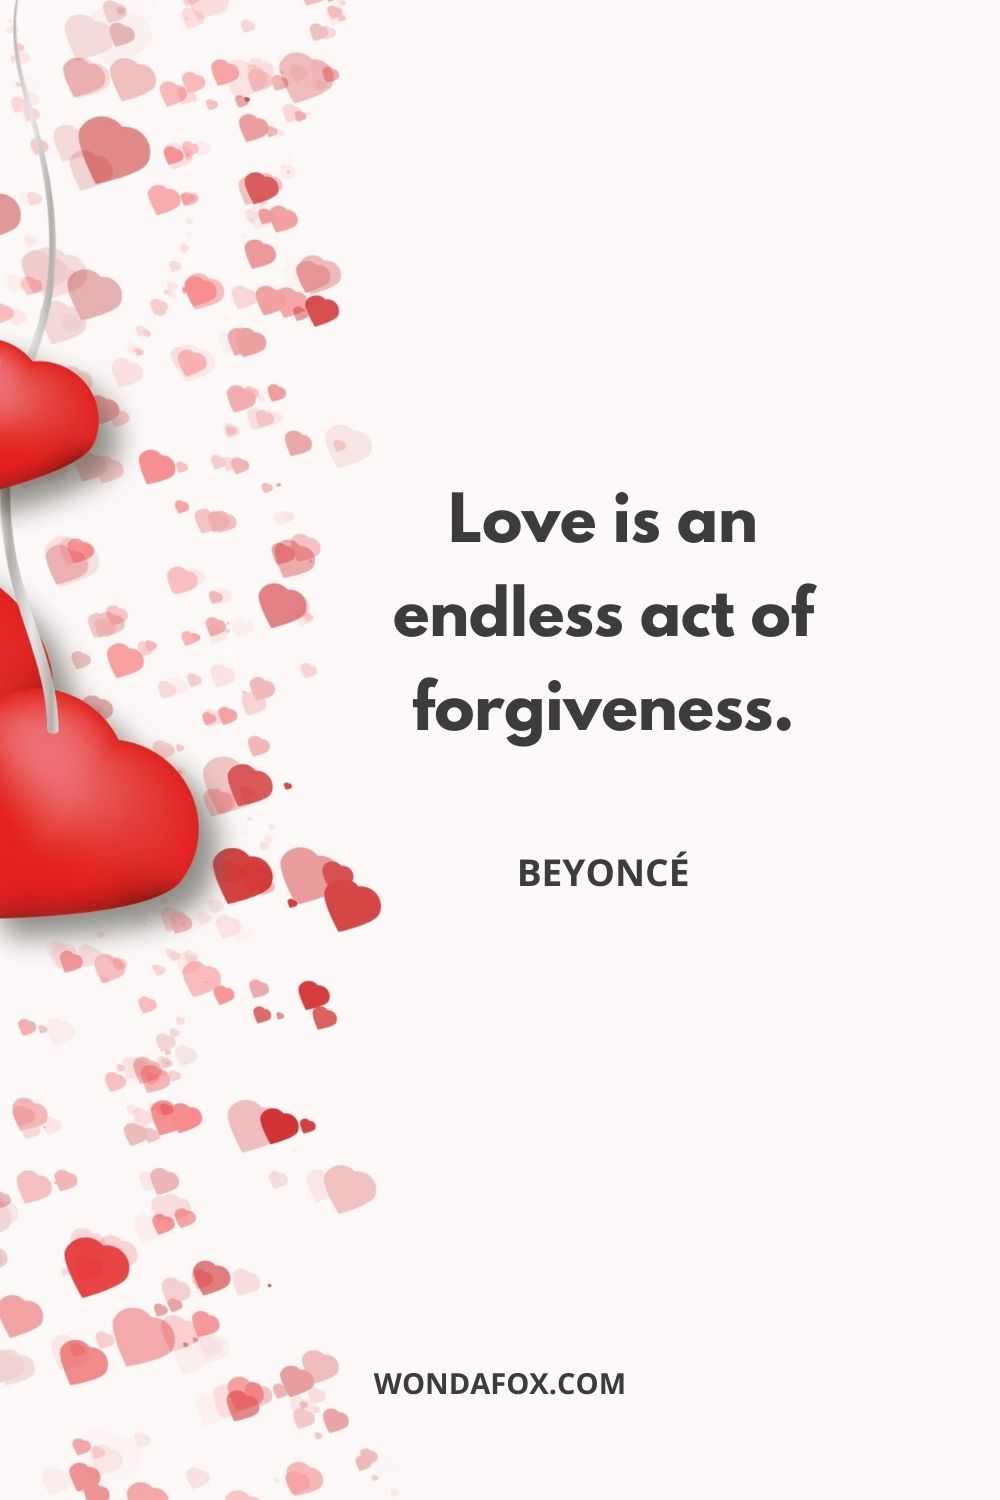 Love is an endless act of forgiveness.